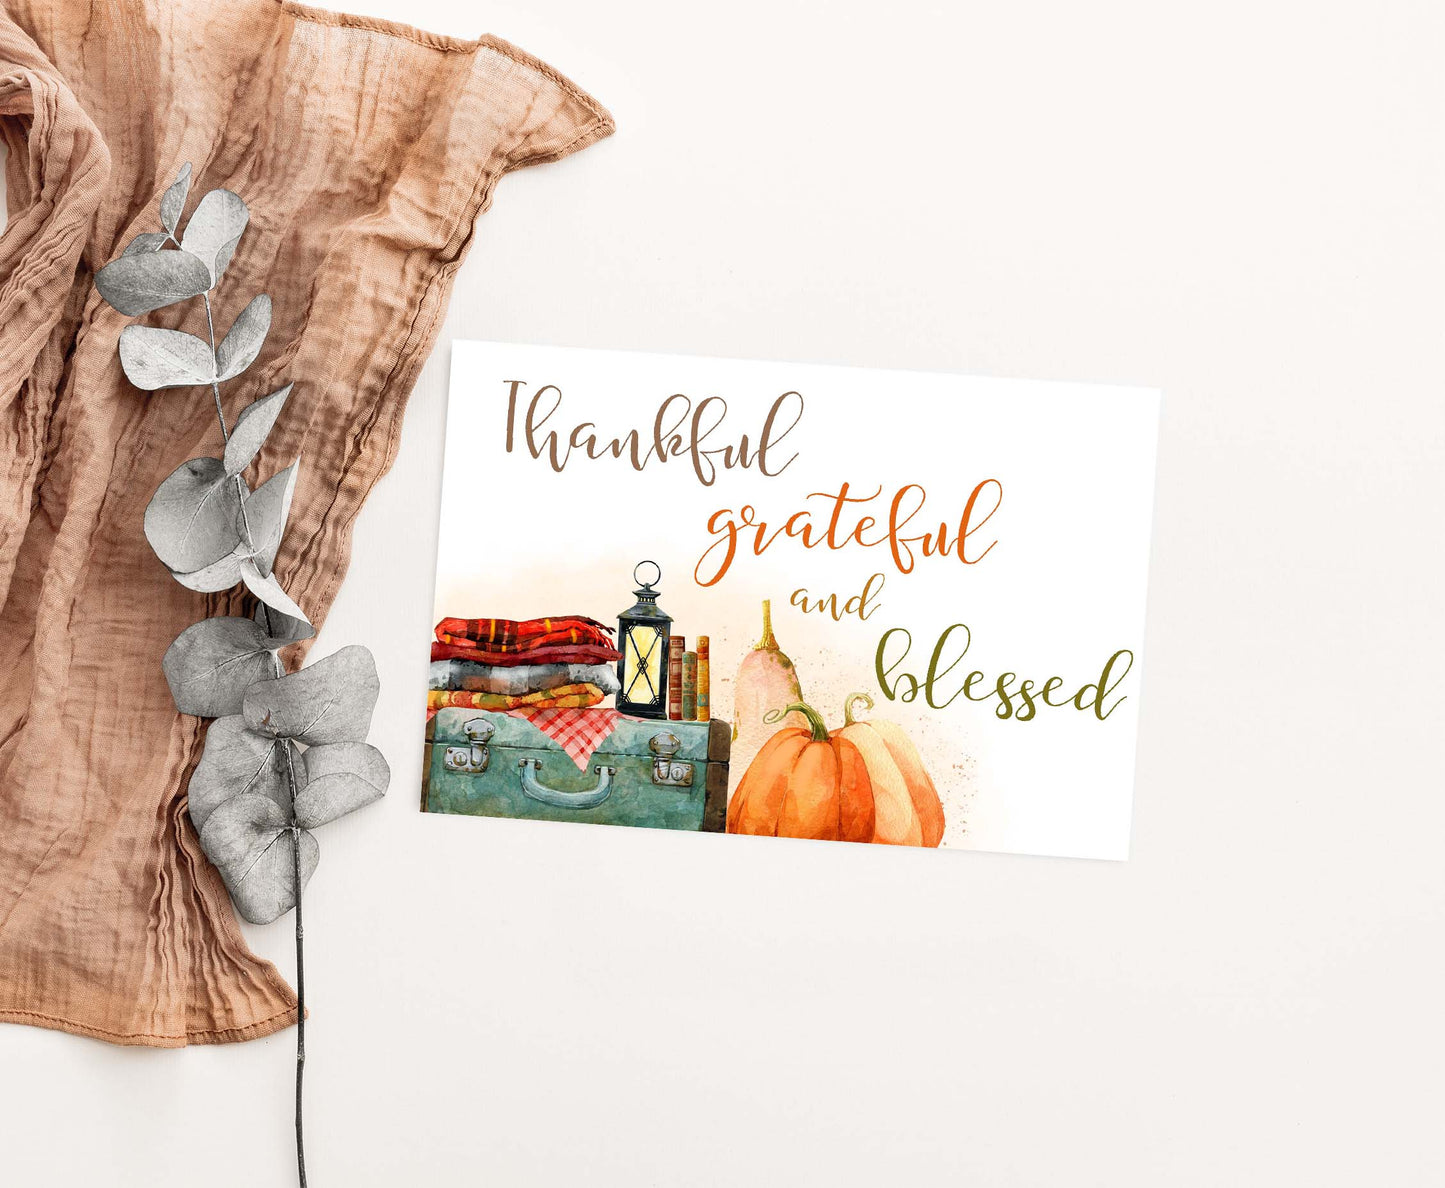 Autumn Thank You Card |  Thankful  greeting and blessed  card - 30